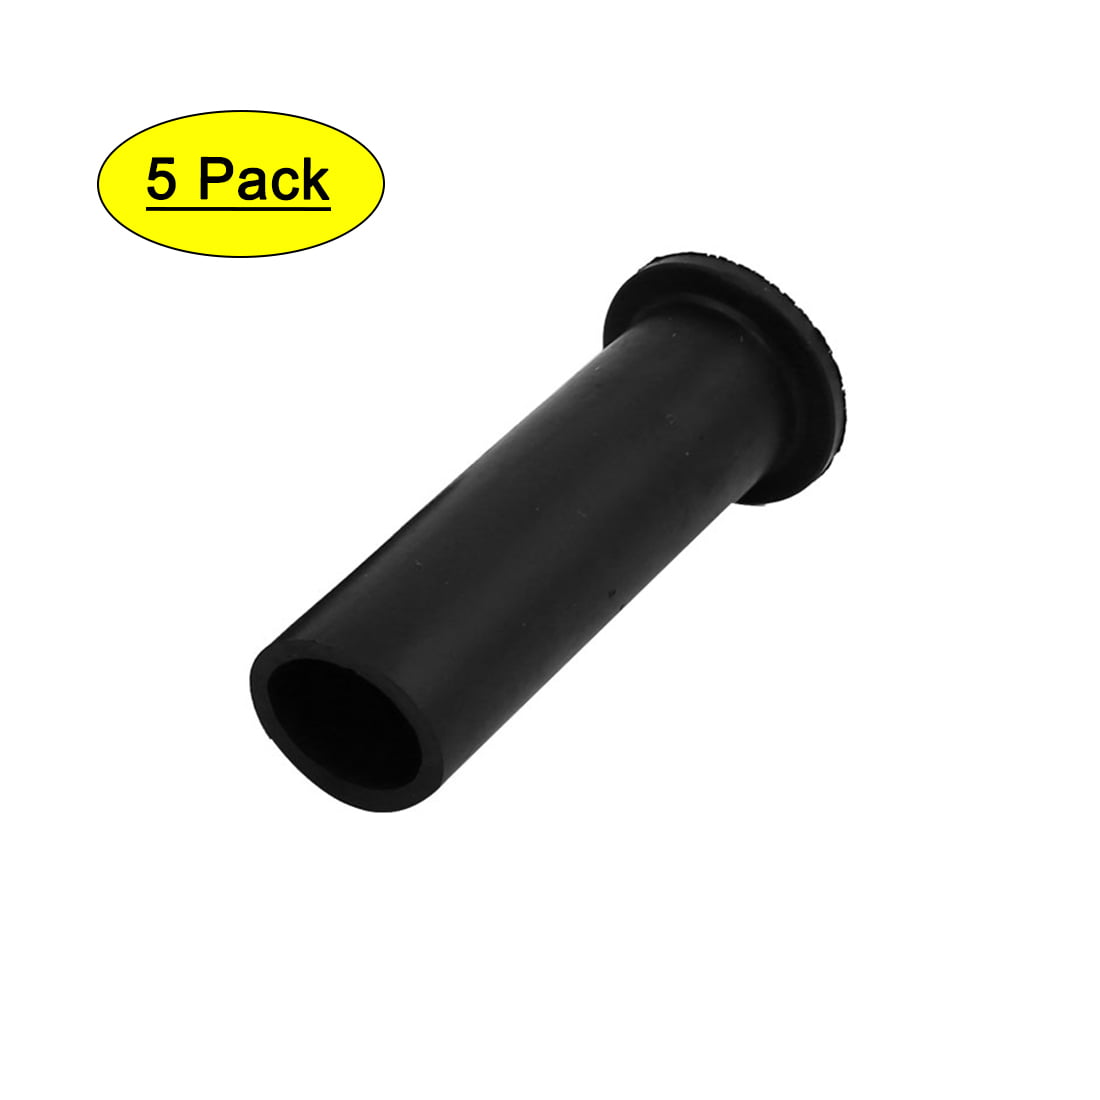 2x Silicone Tube Bushing Sleeve for 5mm 7mm Diameter Water Cooling Tube RC Boat